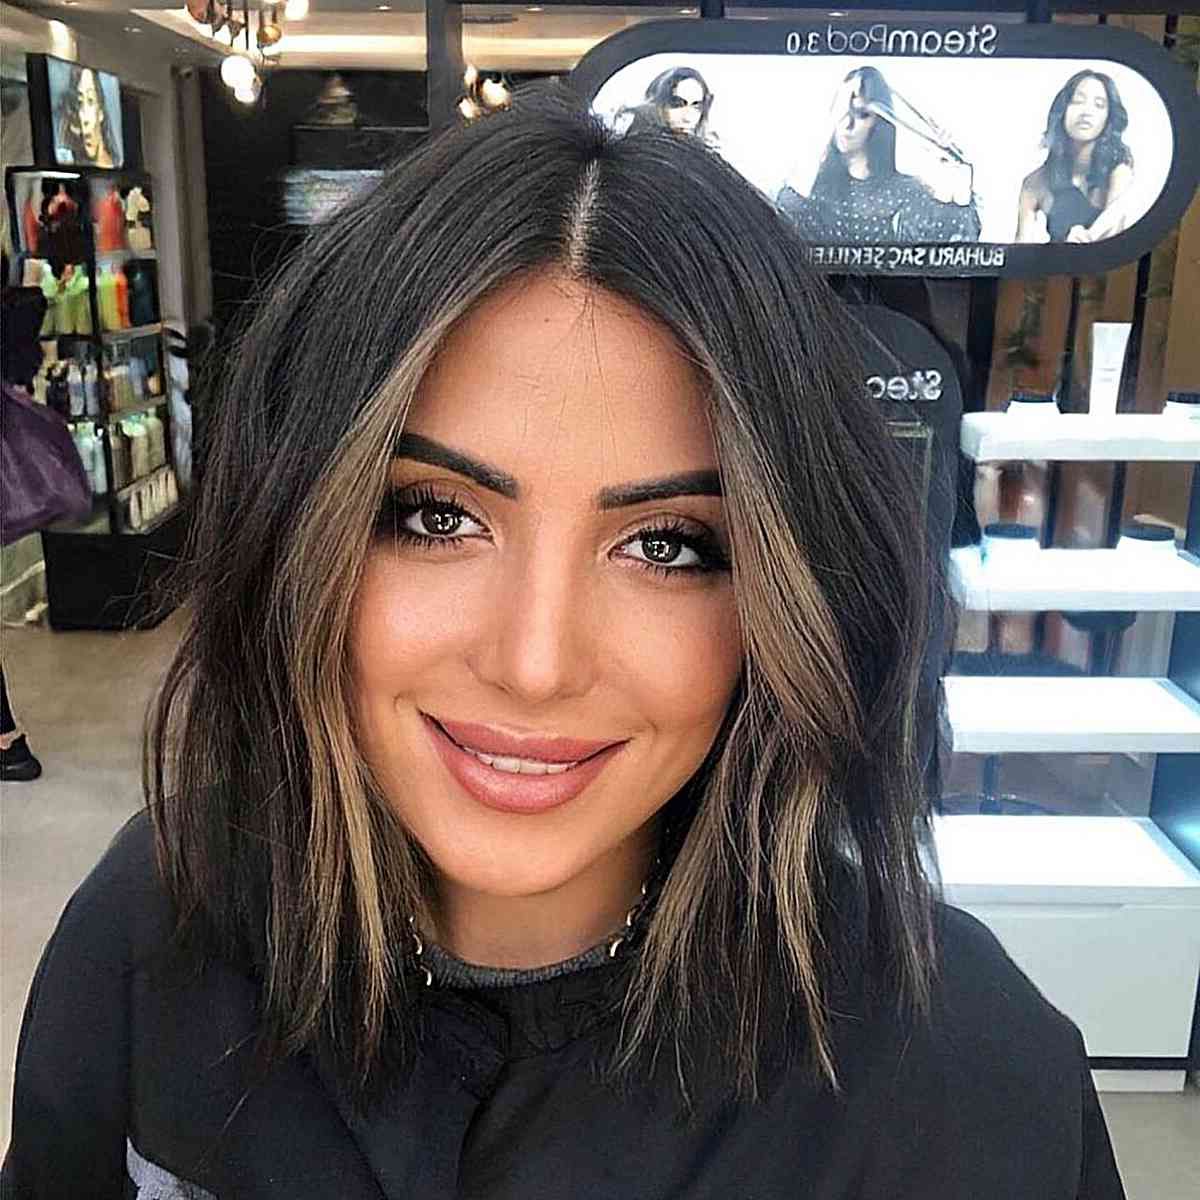 2020 Straight Layered Lob Pertaining To 49 Sharpest Straight Lob Haircut Ideas For That Ultra Sleek Look (Gallery 3 of 20)